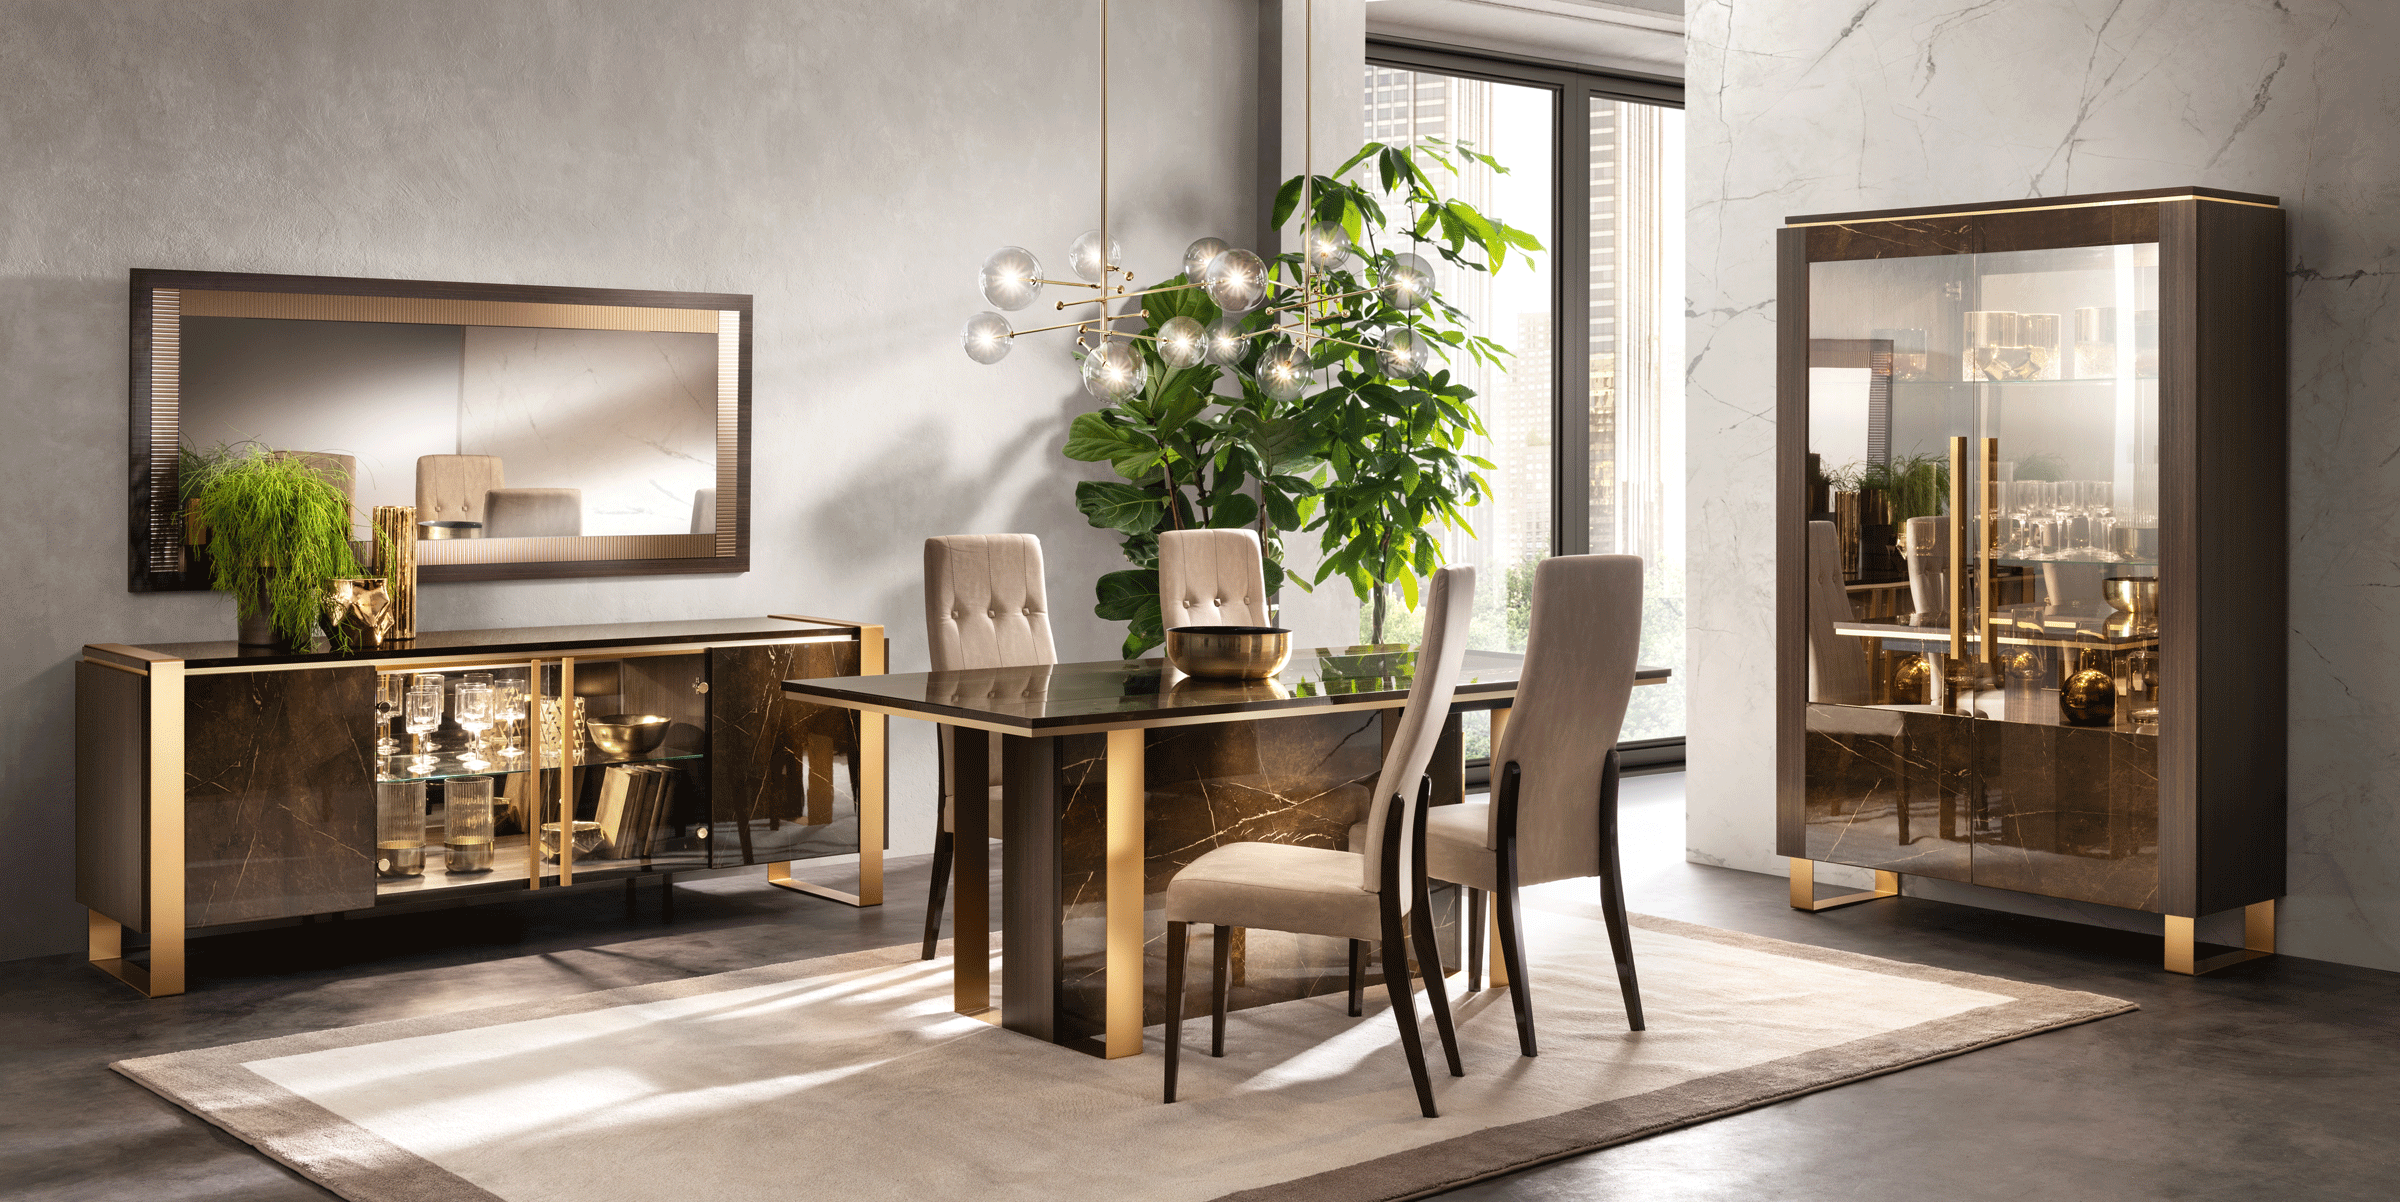 Dining Room Furniture Modern Dining Room Sets Essenza Dining by Arredoclassic, Italy Additional